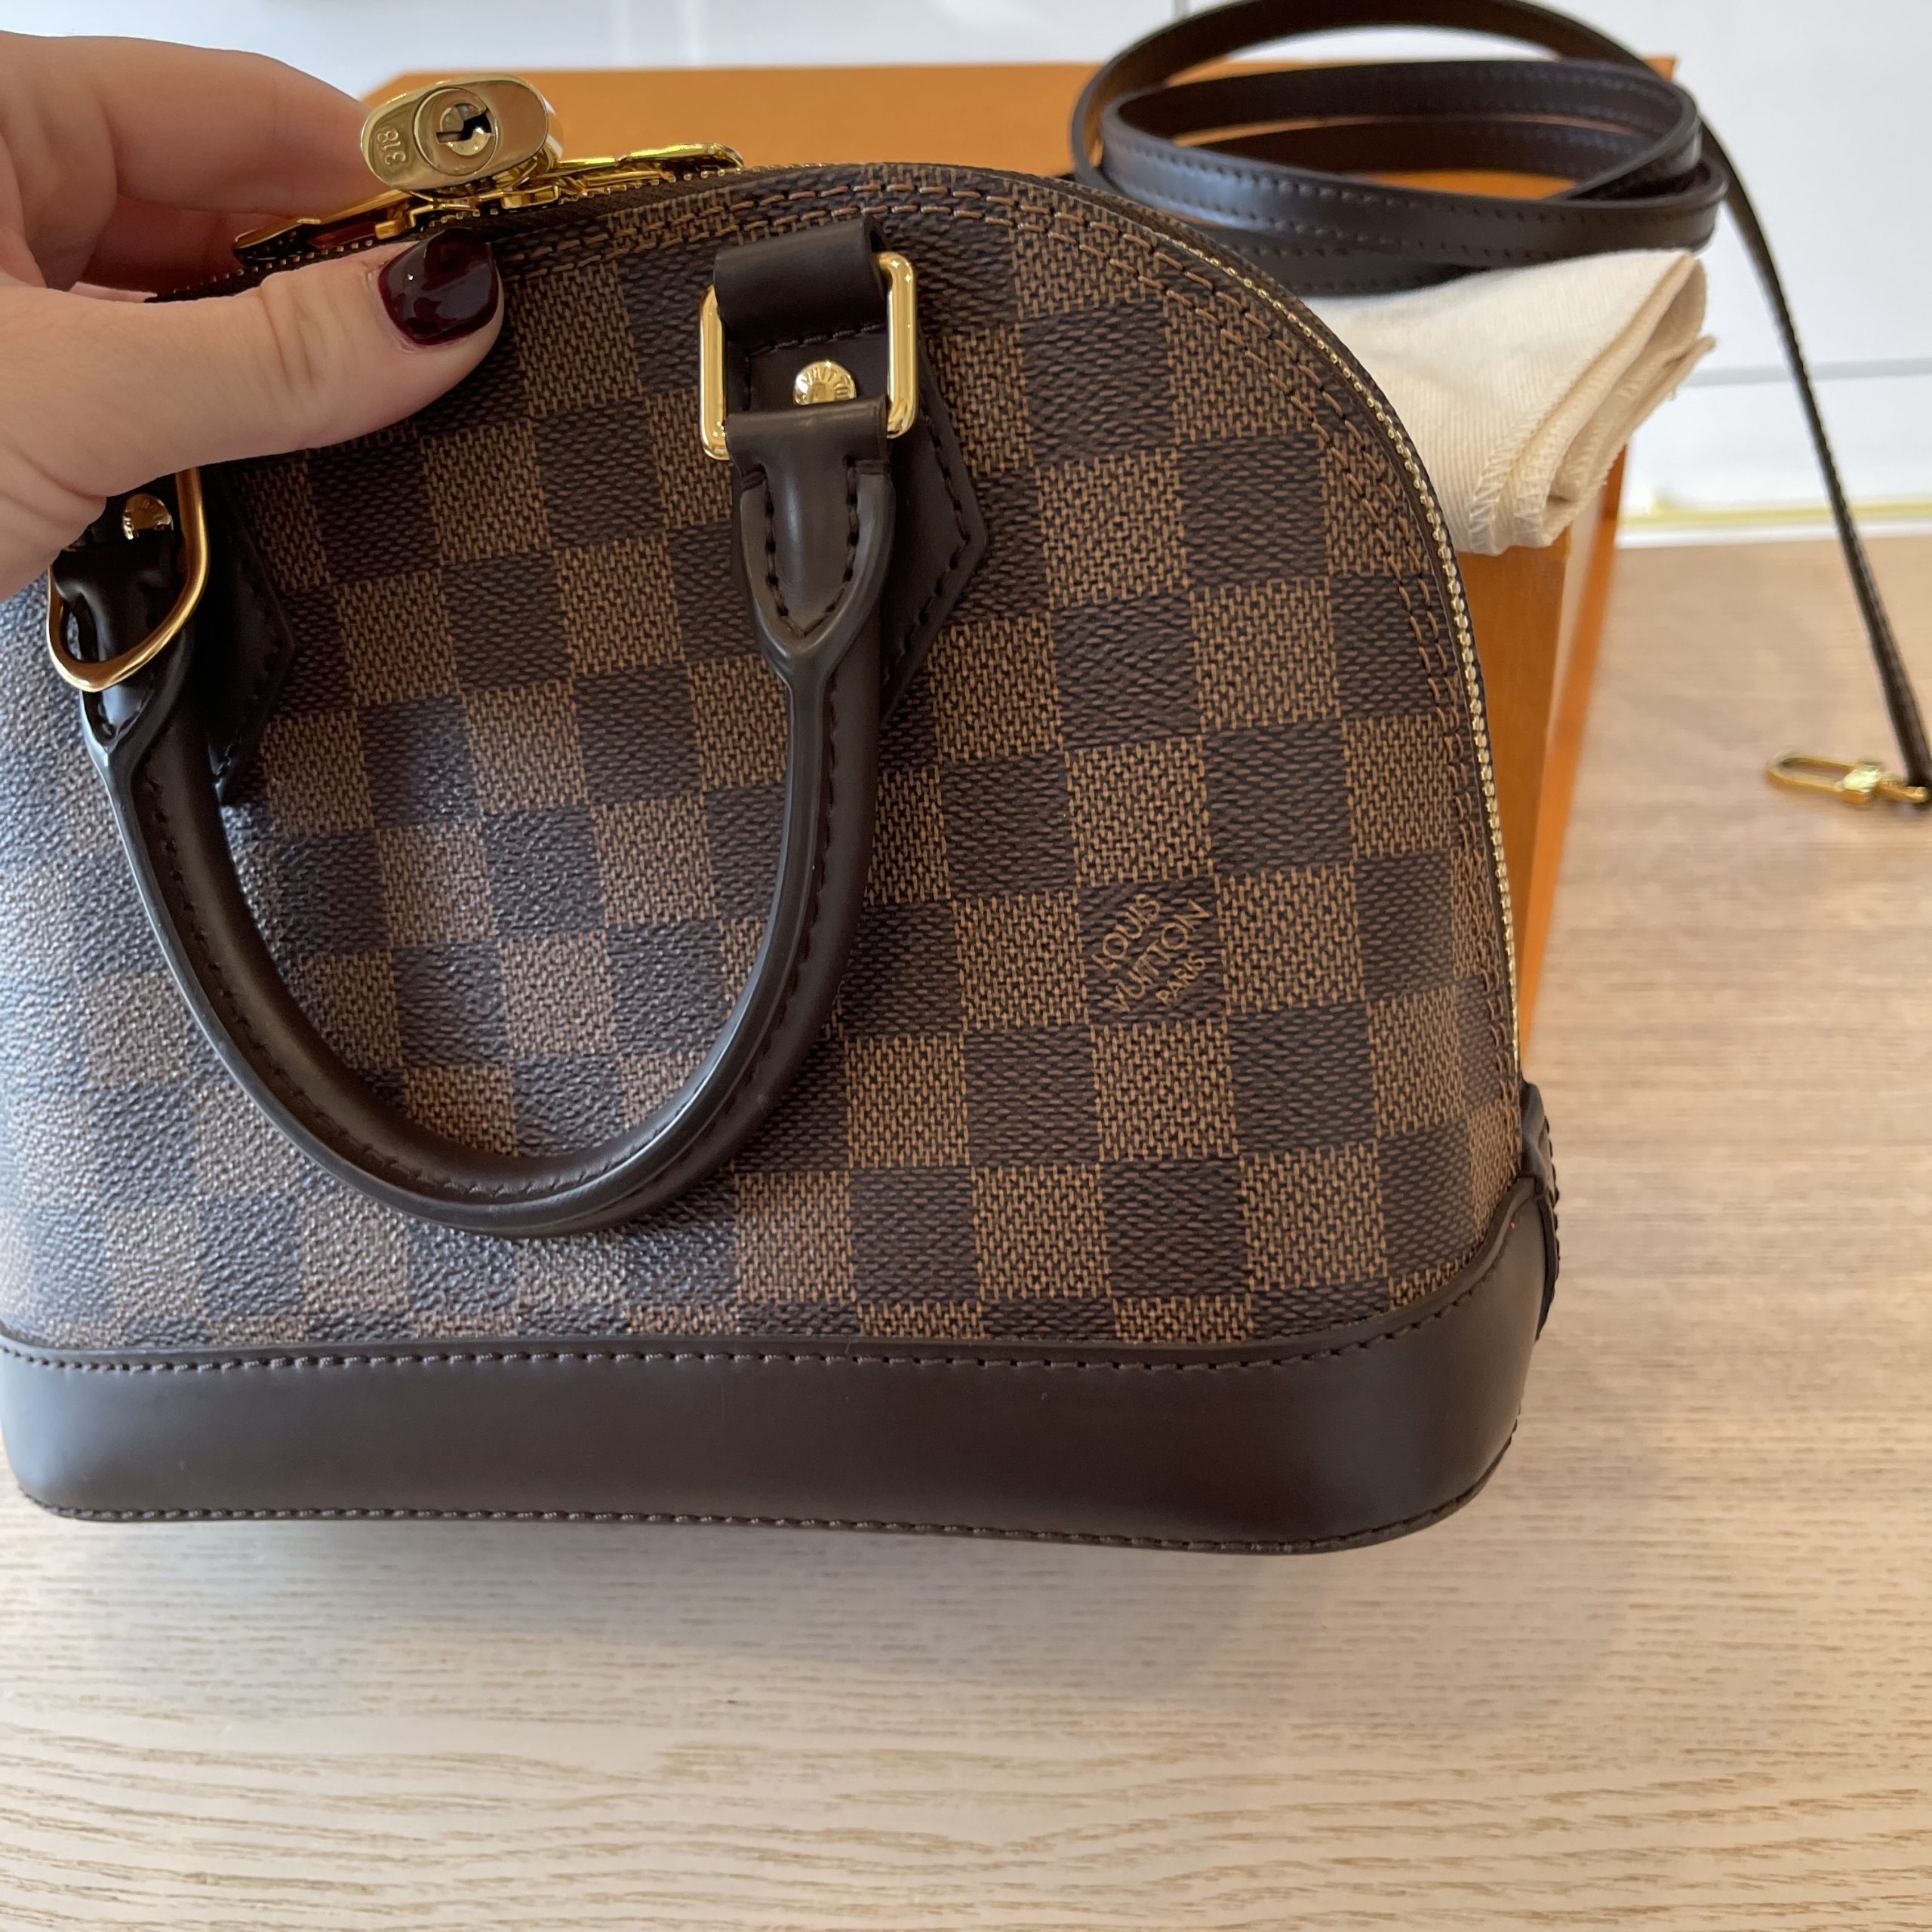 Louis Vuitton Alma BB brand new from 2019 comes with box, receipt